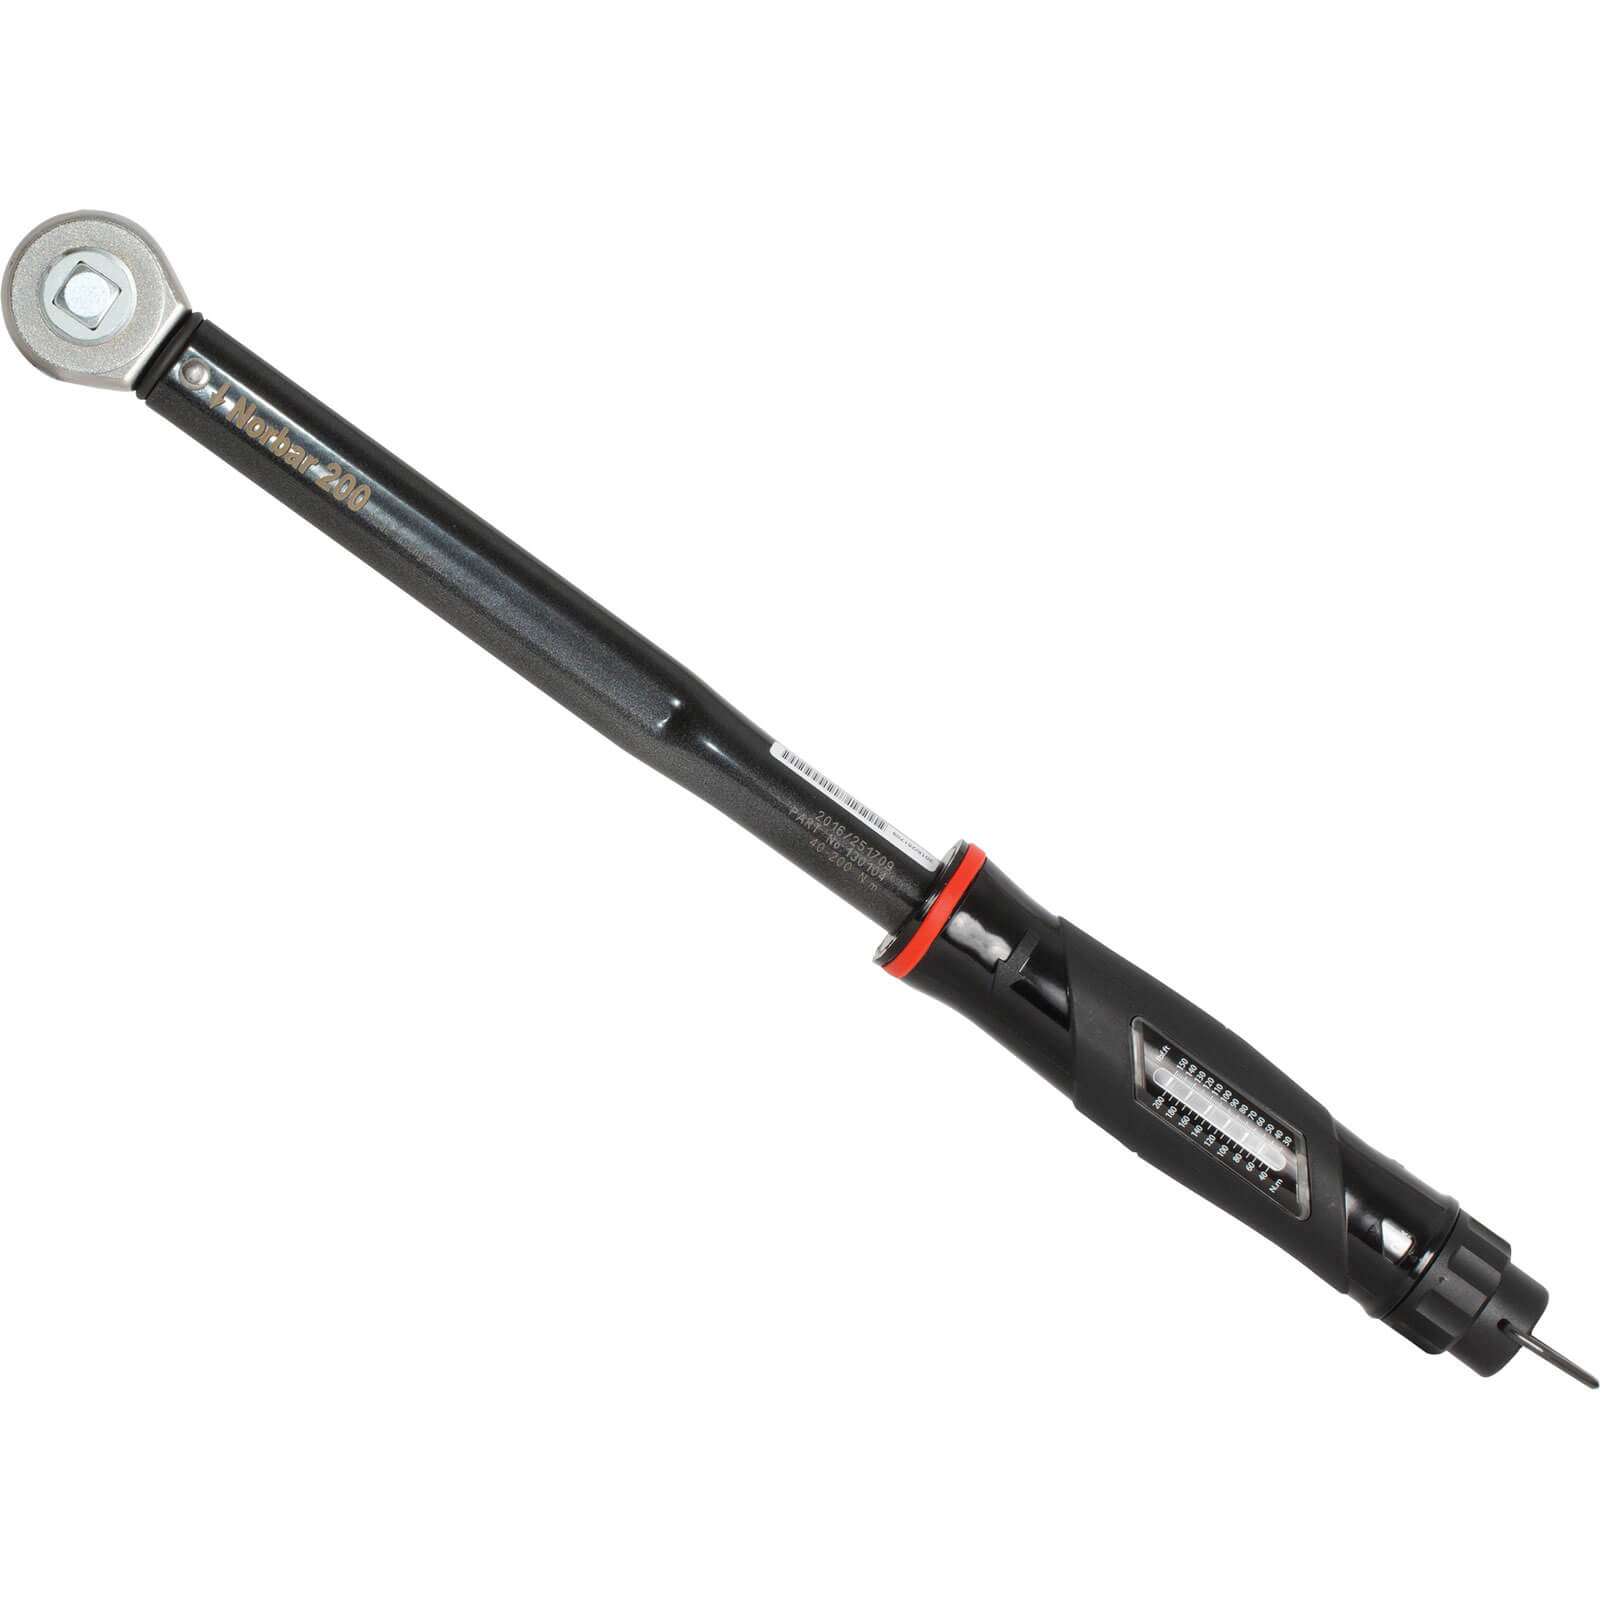 Image of Norbar 1/2" Nortorque Adjustable Dual Scale Ratchet Torque Wrench 1/2" 40Nm - 200Nm